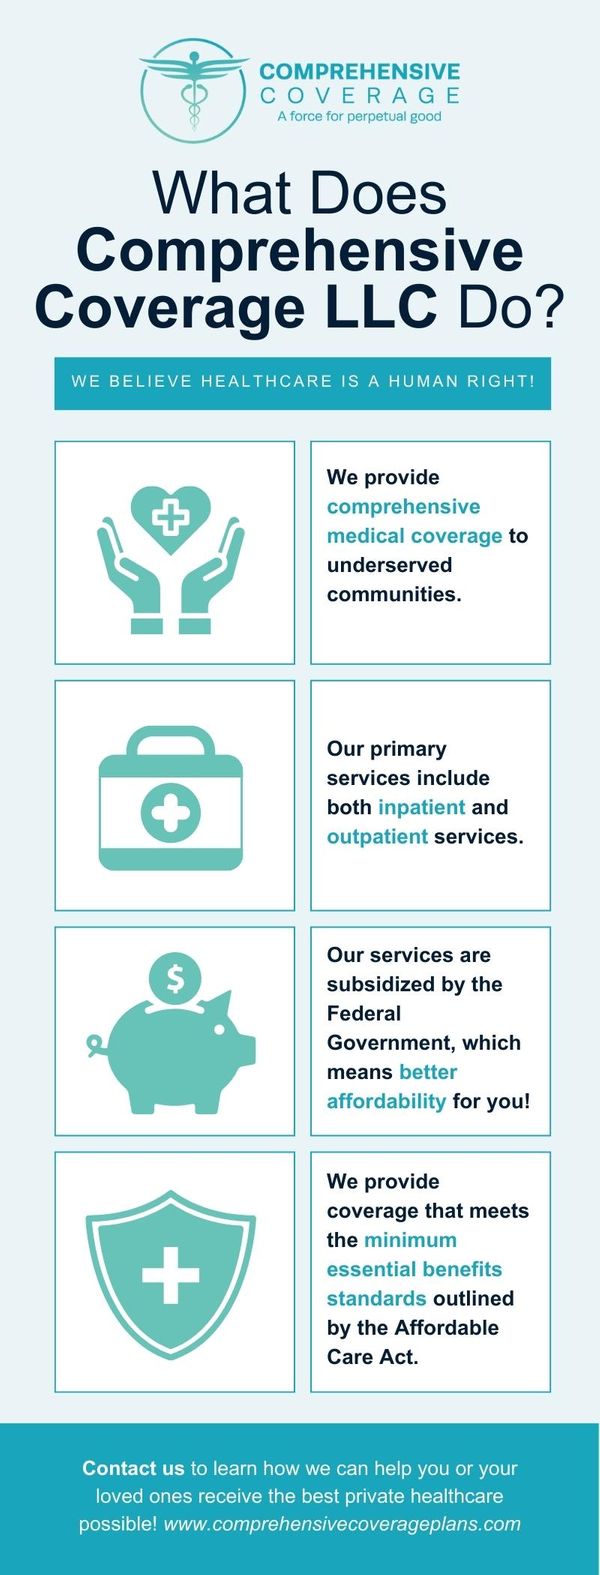 M37652 - Infographic - What Does Comprehensive Coverage LLC Do (800 × 2100 px).jpg